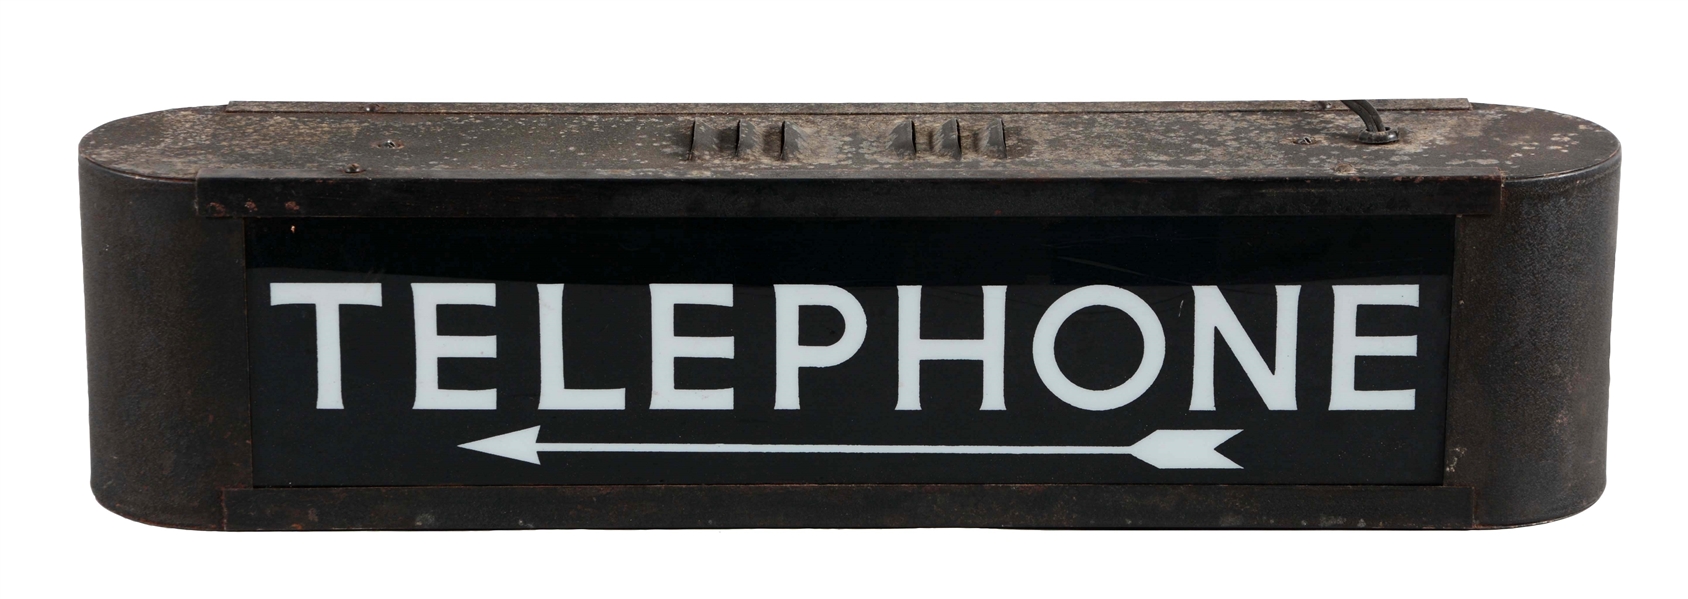 LIGHT UP TELEPHONE SIGN WITH POINTING ARROW.